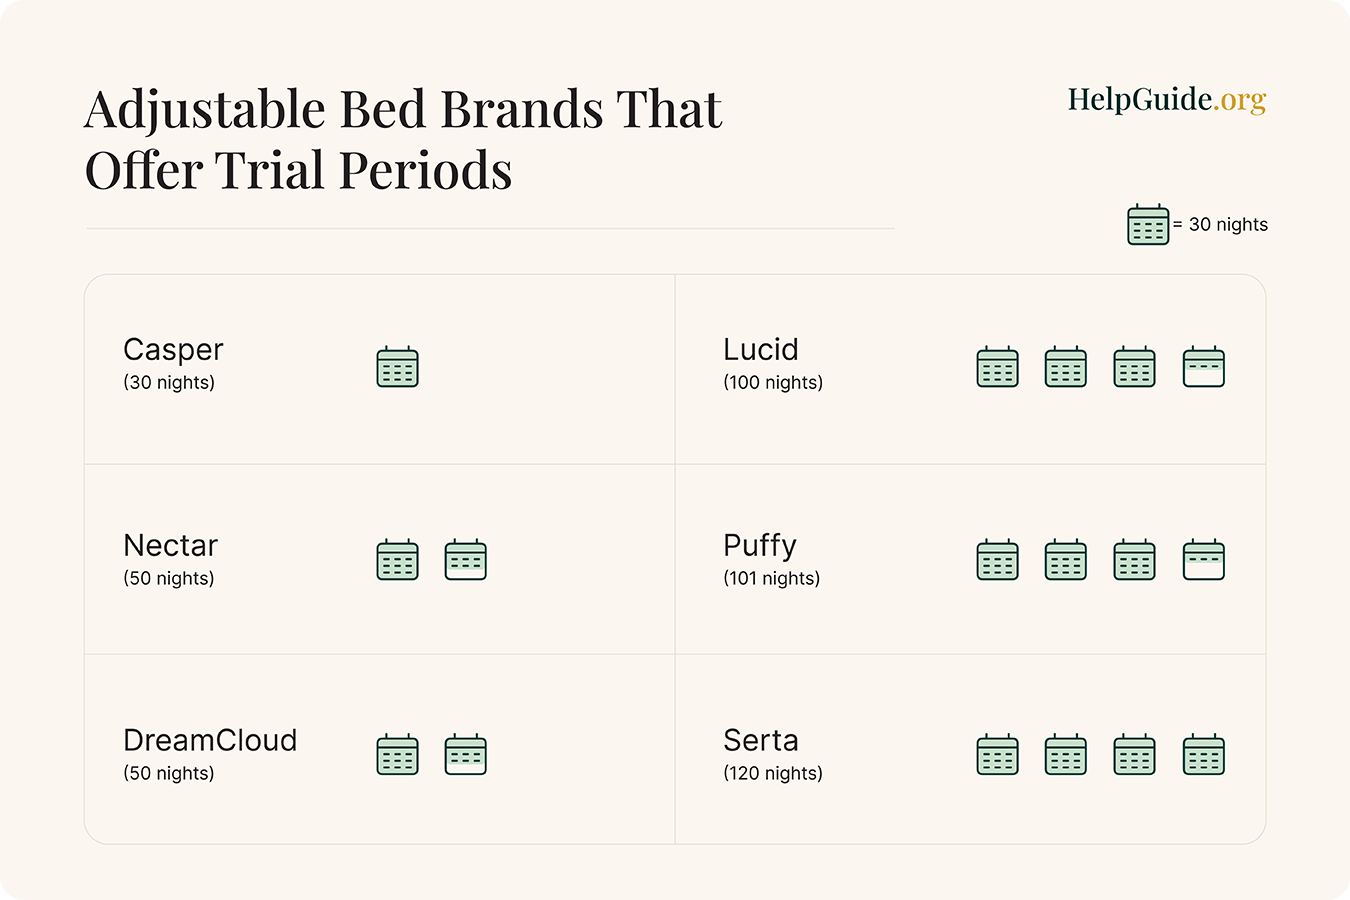 A comparison of adjustable bed trial period lengths by brand